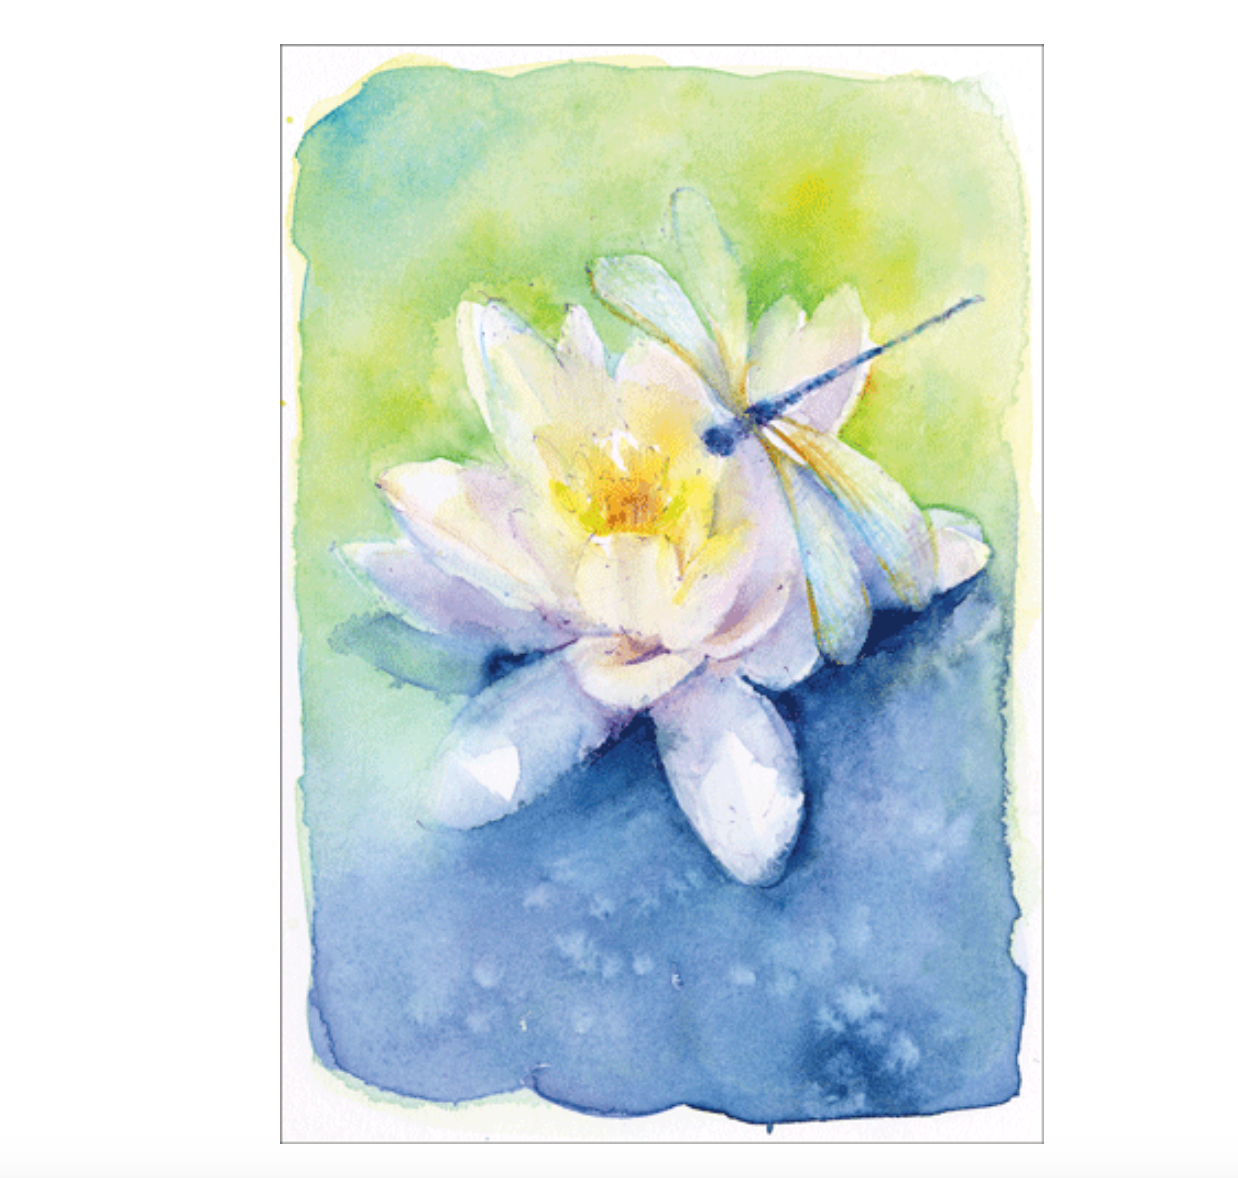 Caspari Dragonfly And Waterlily – Blank Inside Card – 1 Card & 1 Envelope